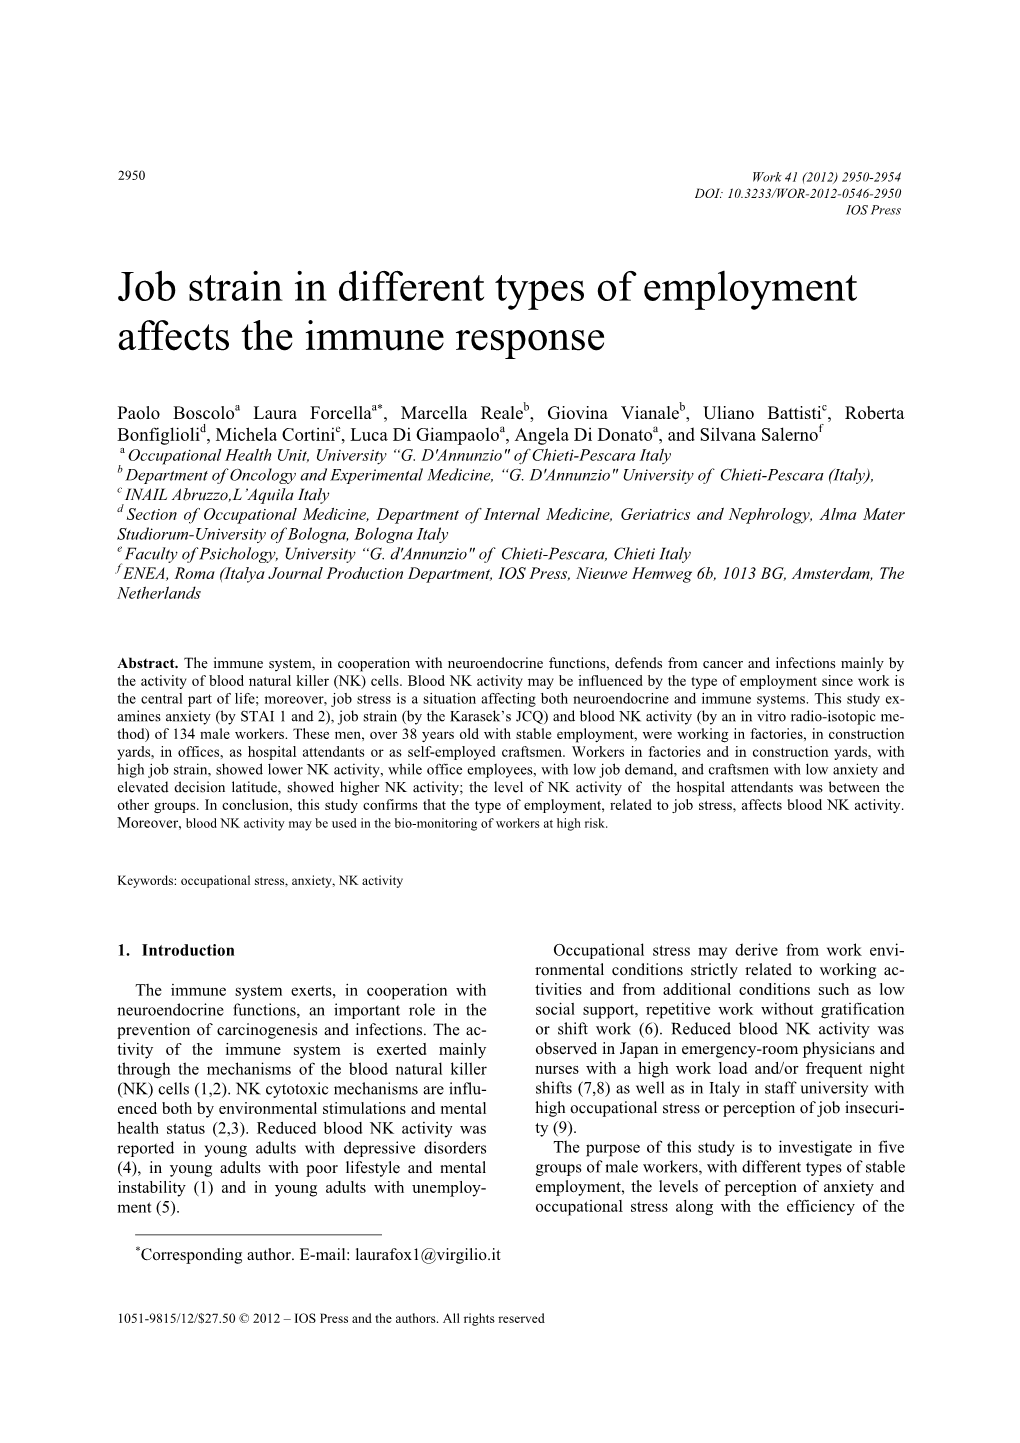 Job Strain in Different Types of Employment Affects the Immune Response